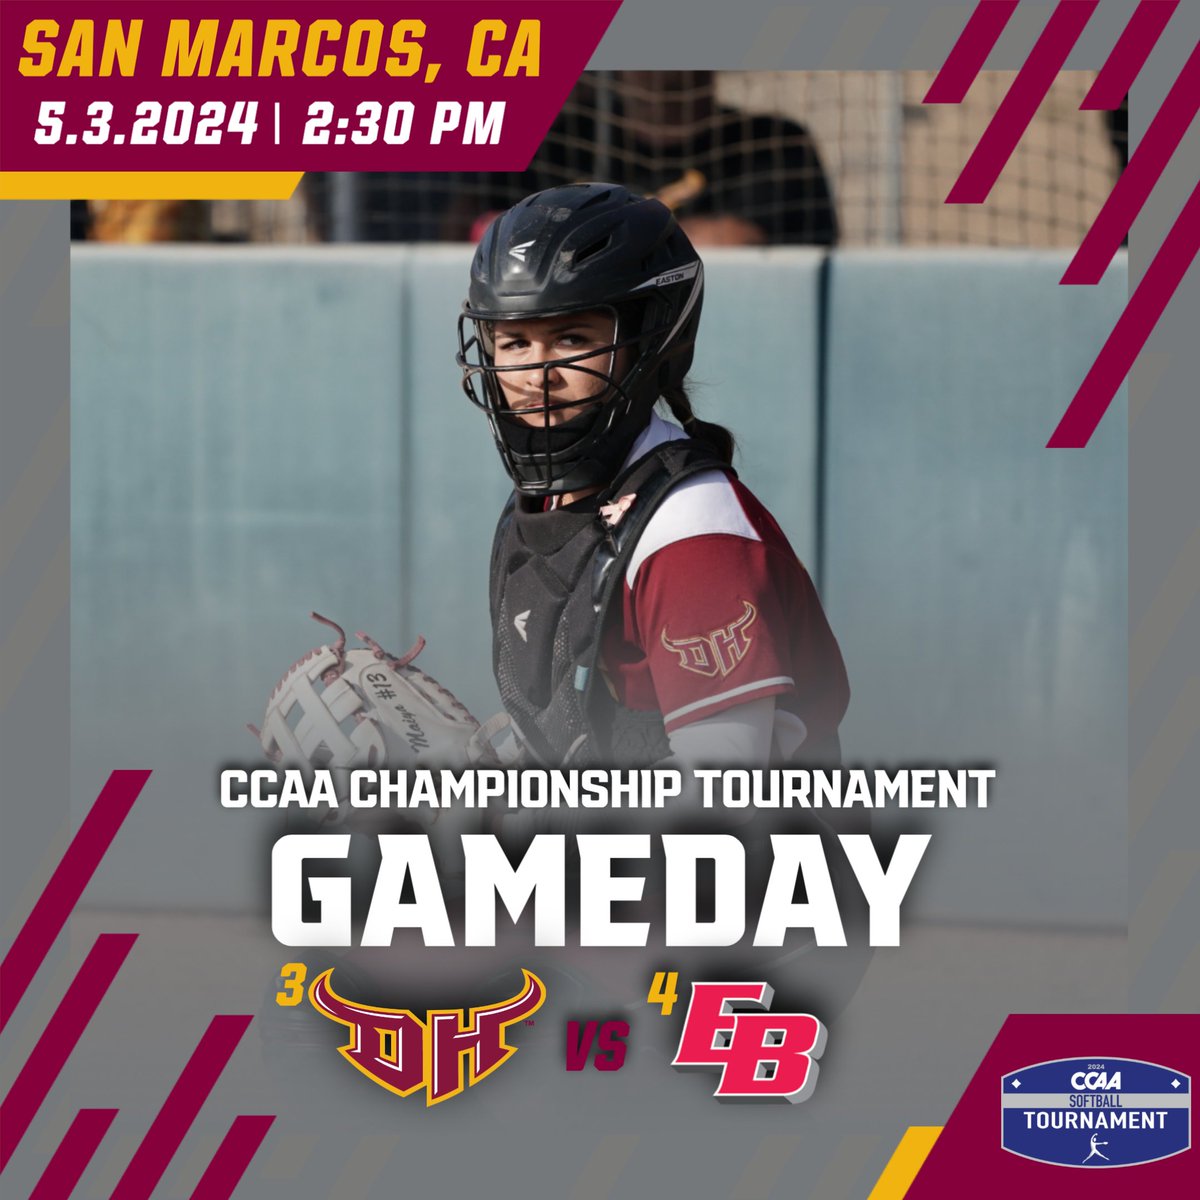 Game is set for @CSUDHsoftball as they will take on Cal State East Bay in the CCAA Championship Tournament! ⏰ - 2:30pm 📍 - San Marcos 🏟️ - CSUSM Softball Field 🎟️ - bit.ly/3VcZVMC 📺 - ccaanetwork.com 📊 - bit.ly/4aXMLIx